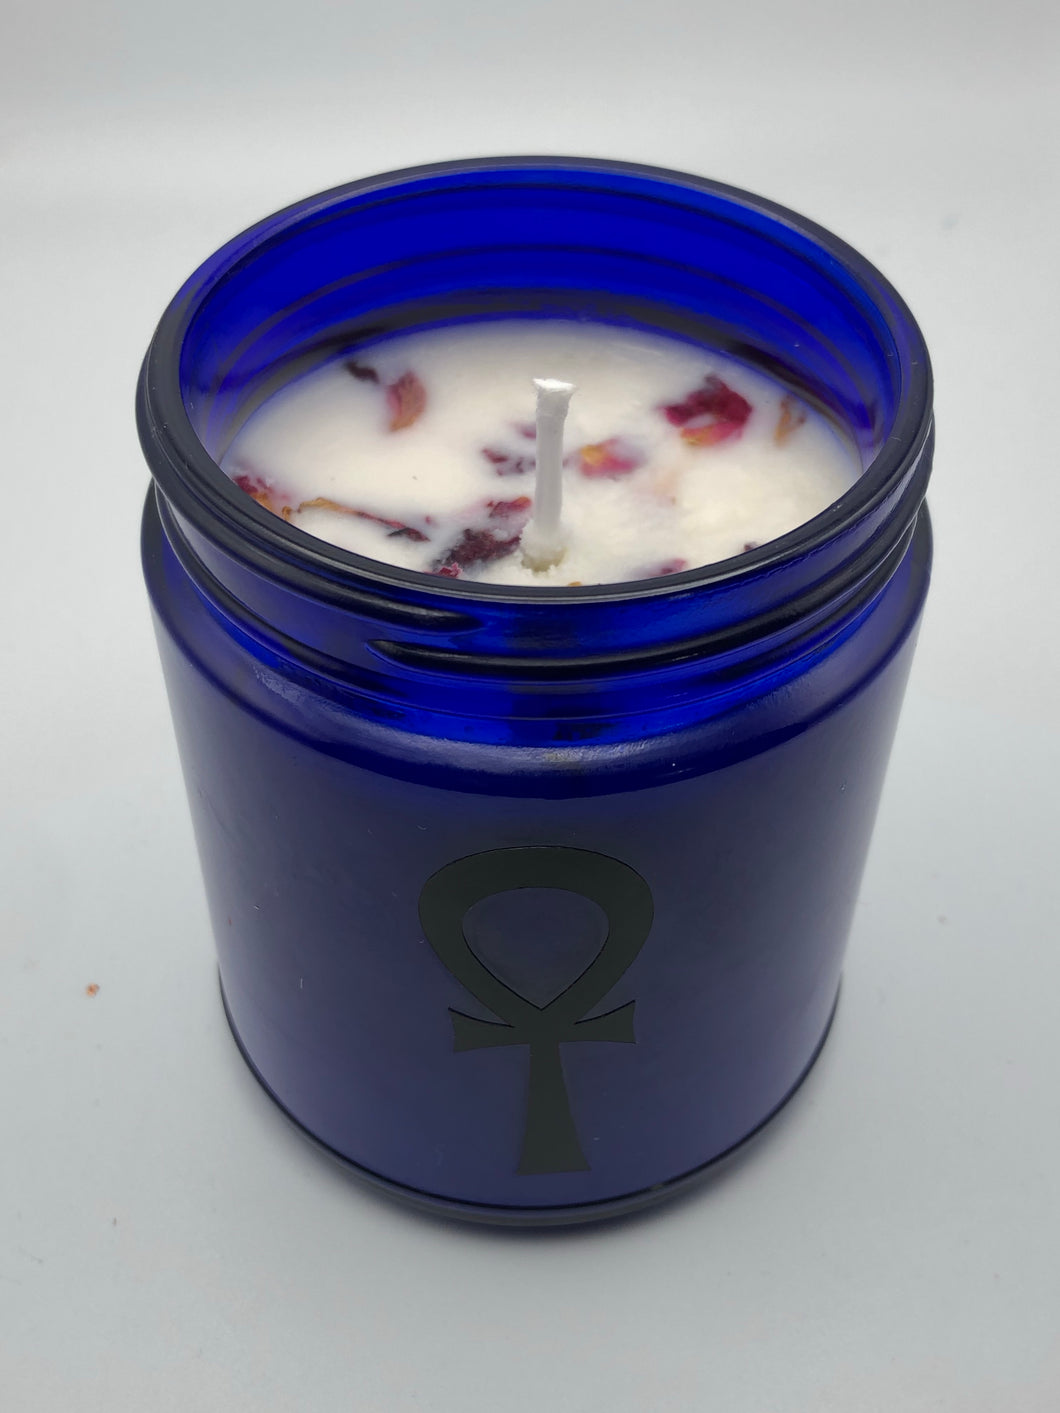 Floral Essence candle